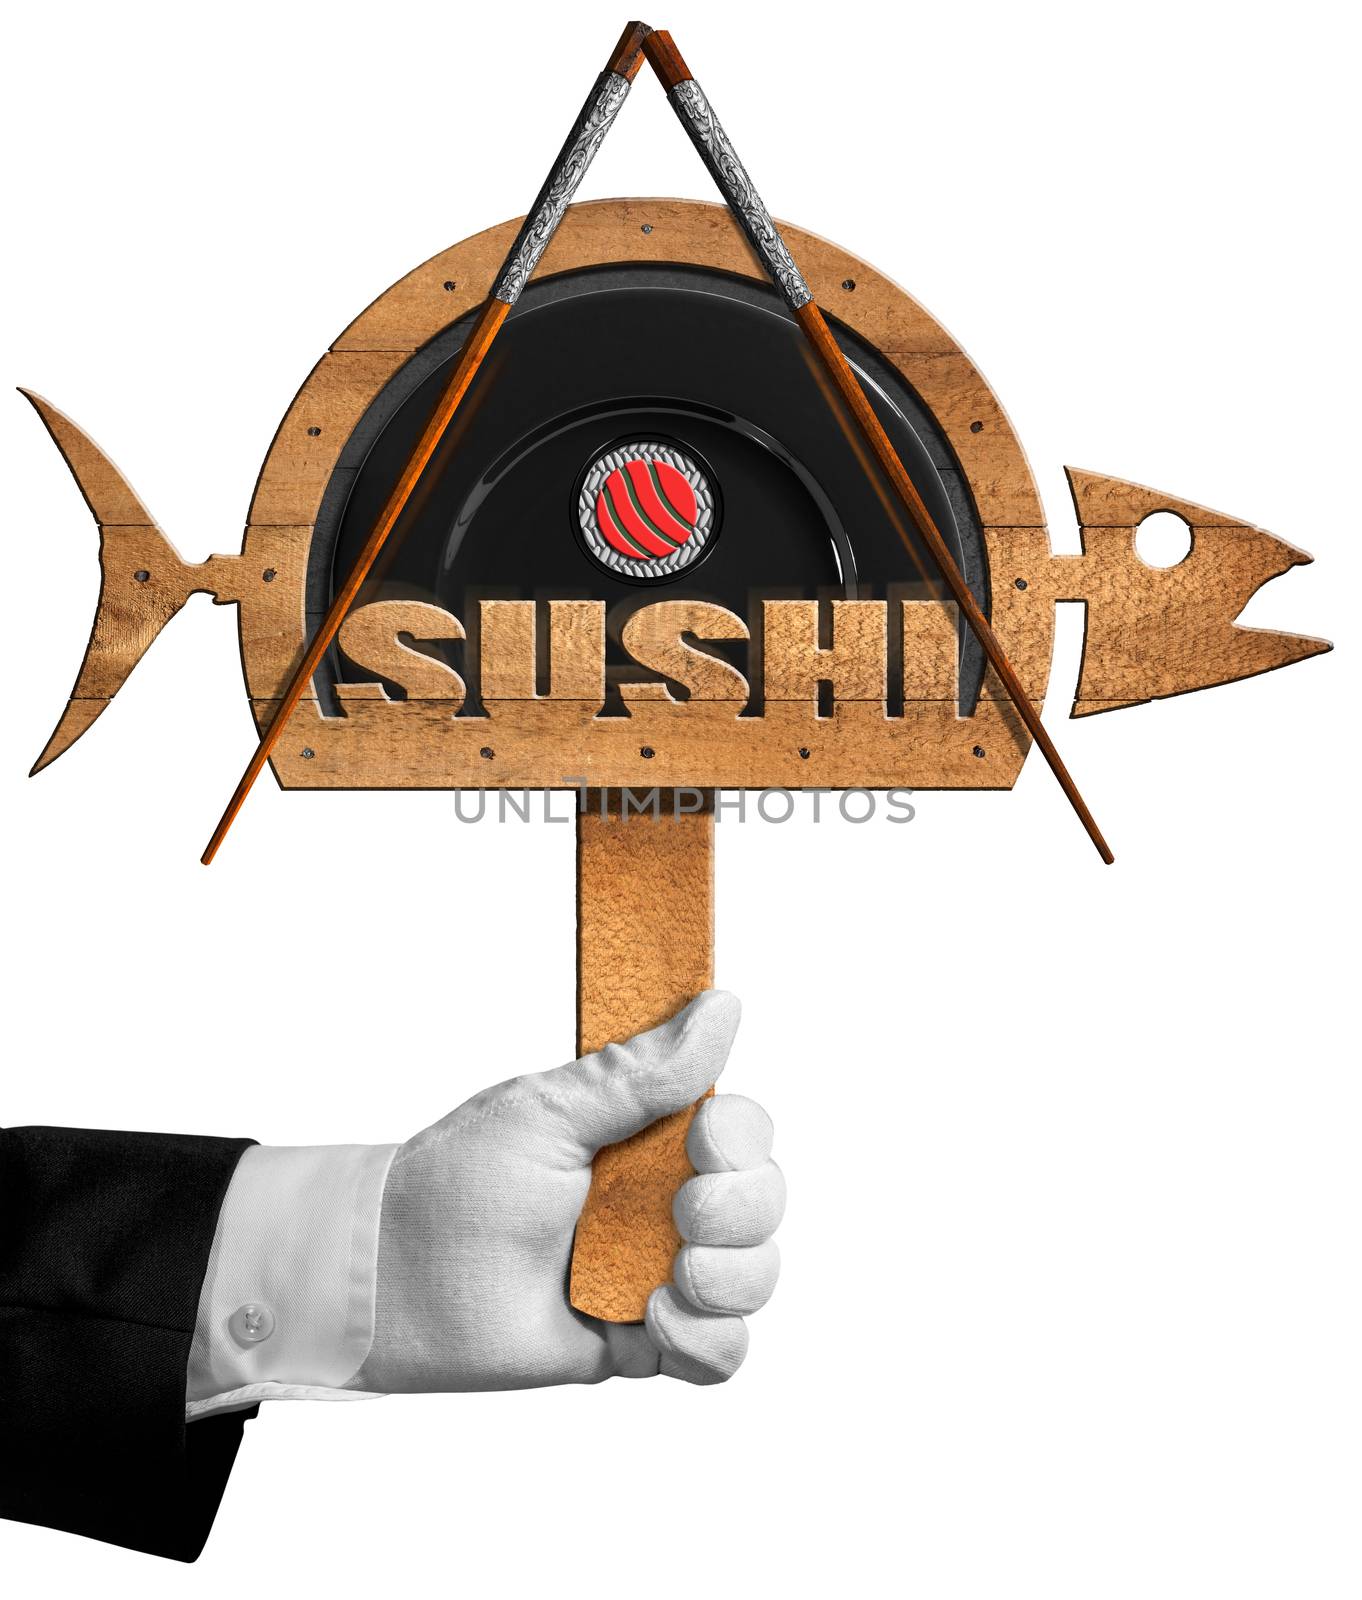 Sushi Symbol with Hand of Chef by catalby